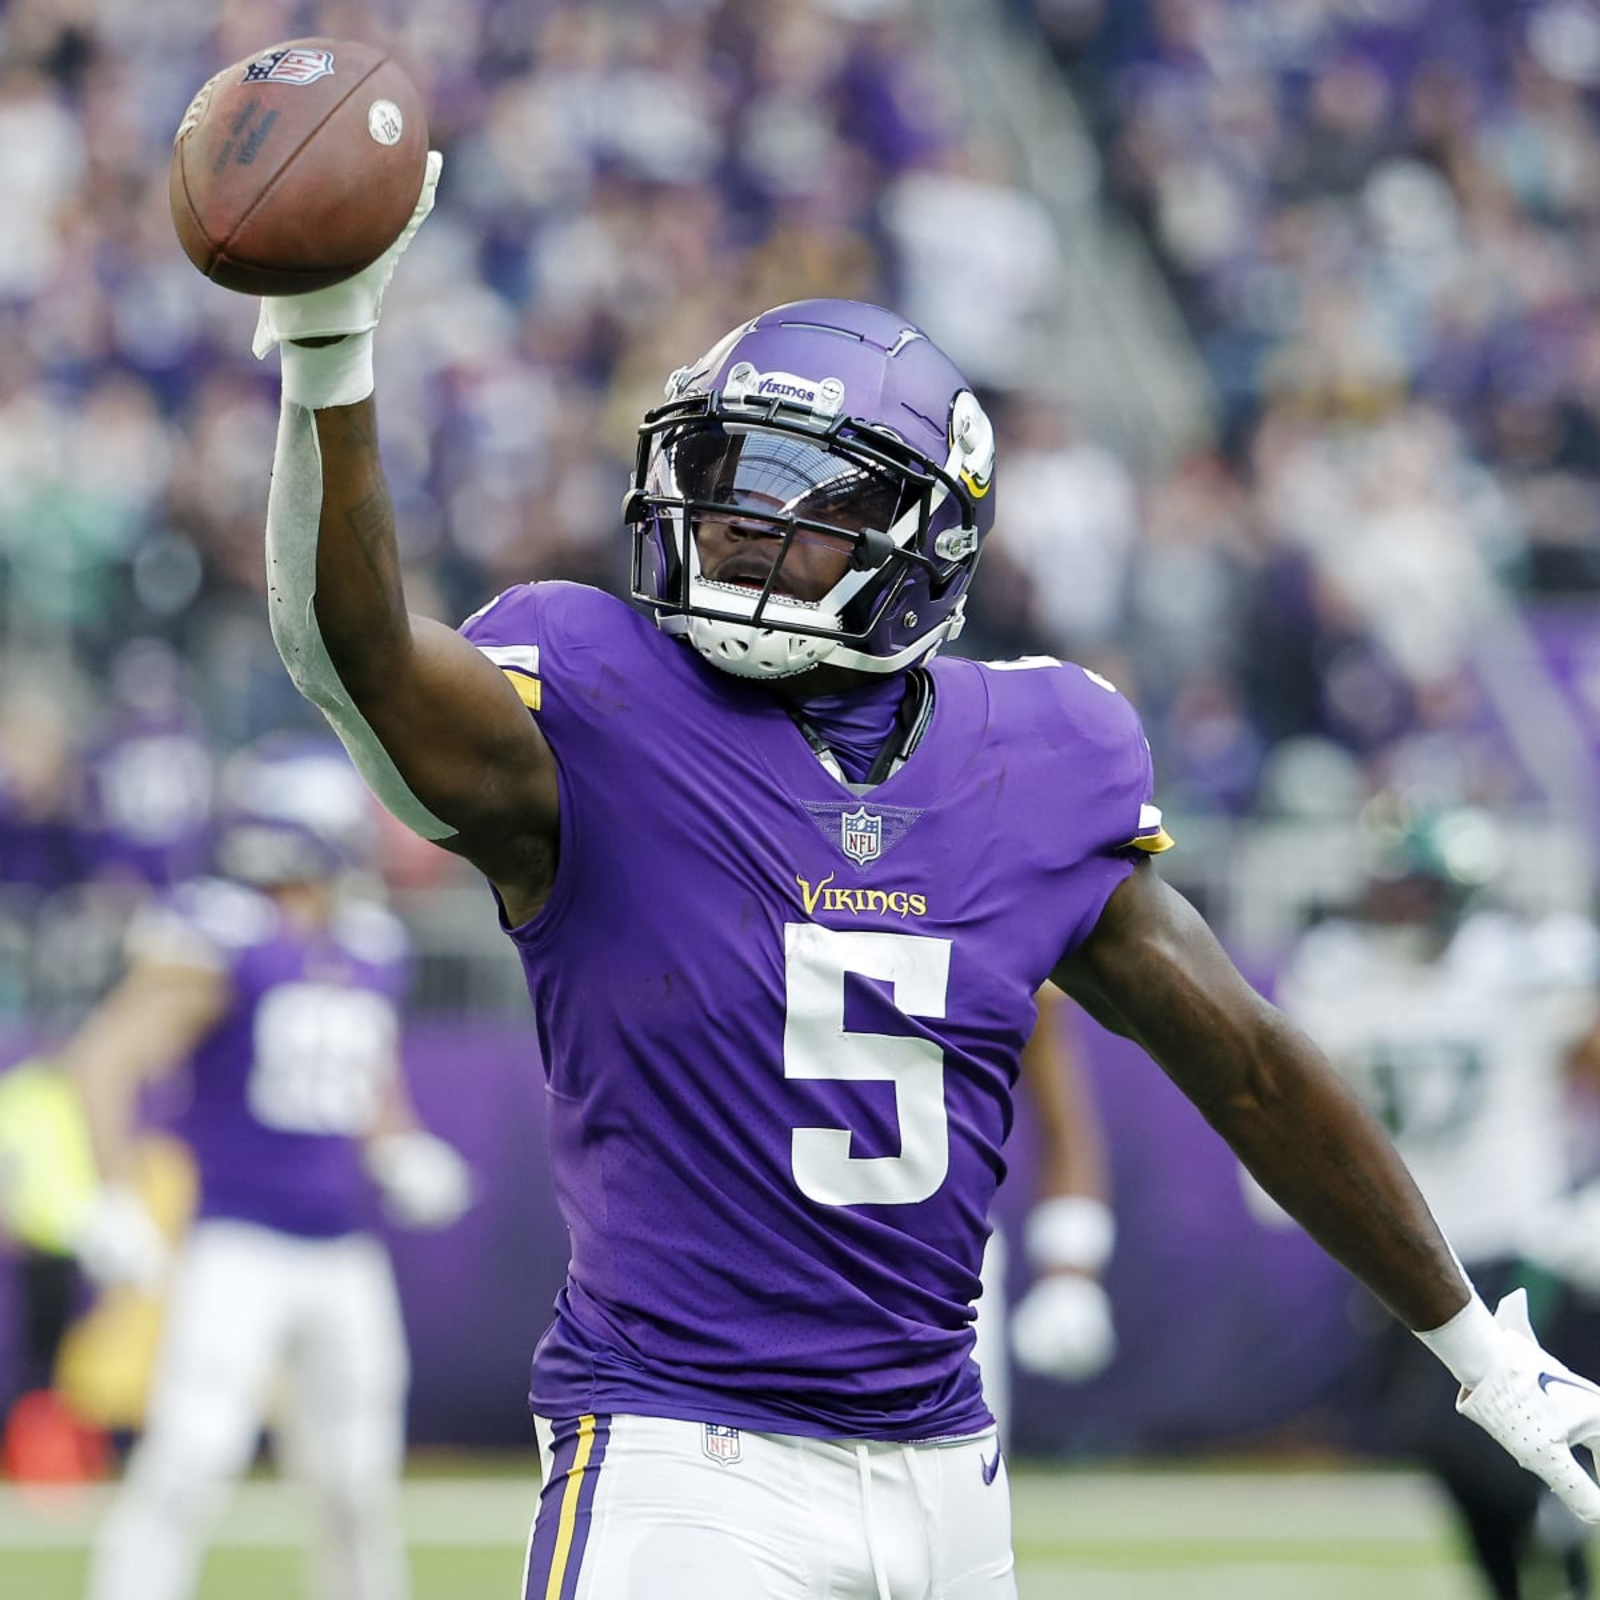 Scouting report: An early look ahead to the Minnesota Vikings